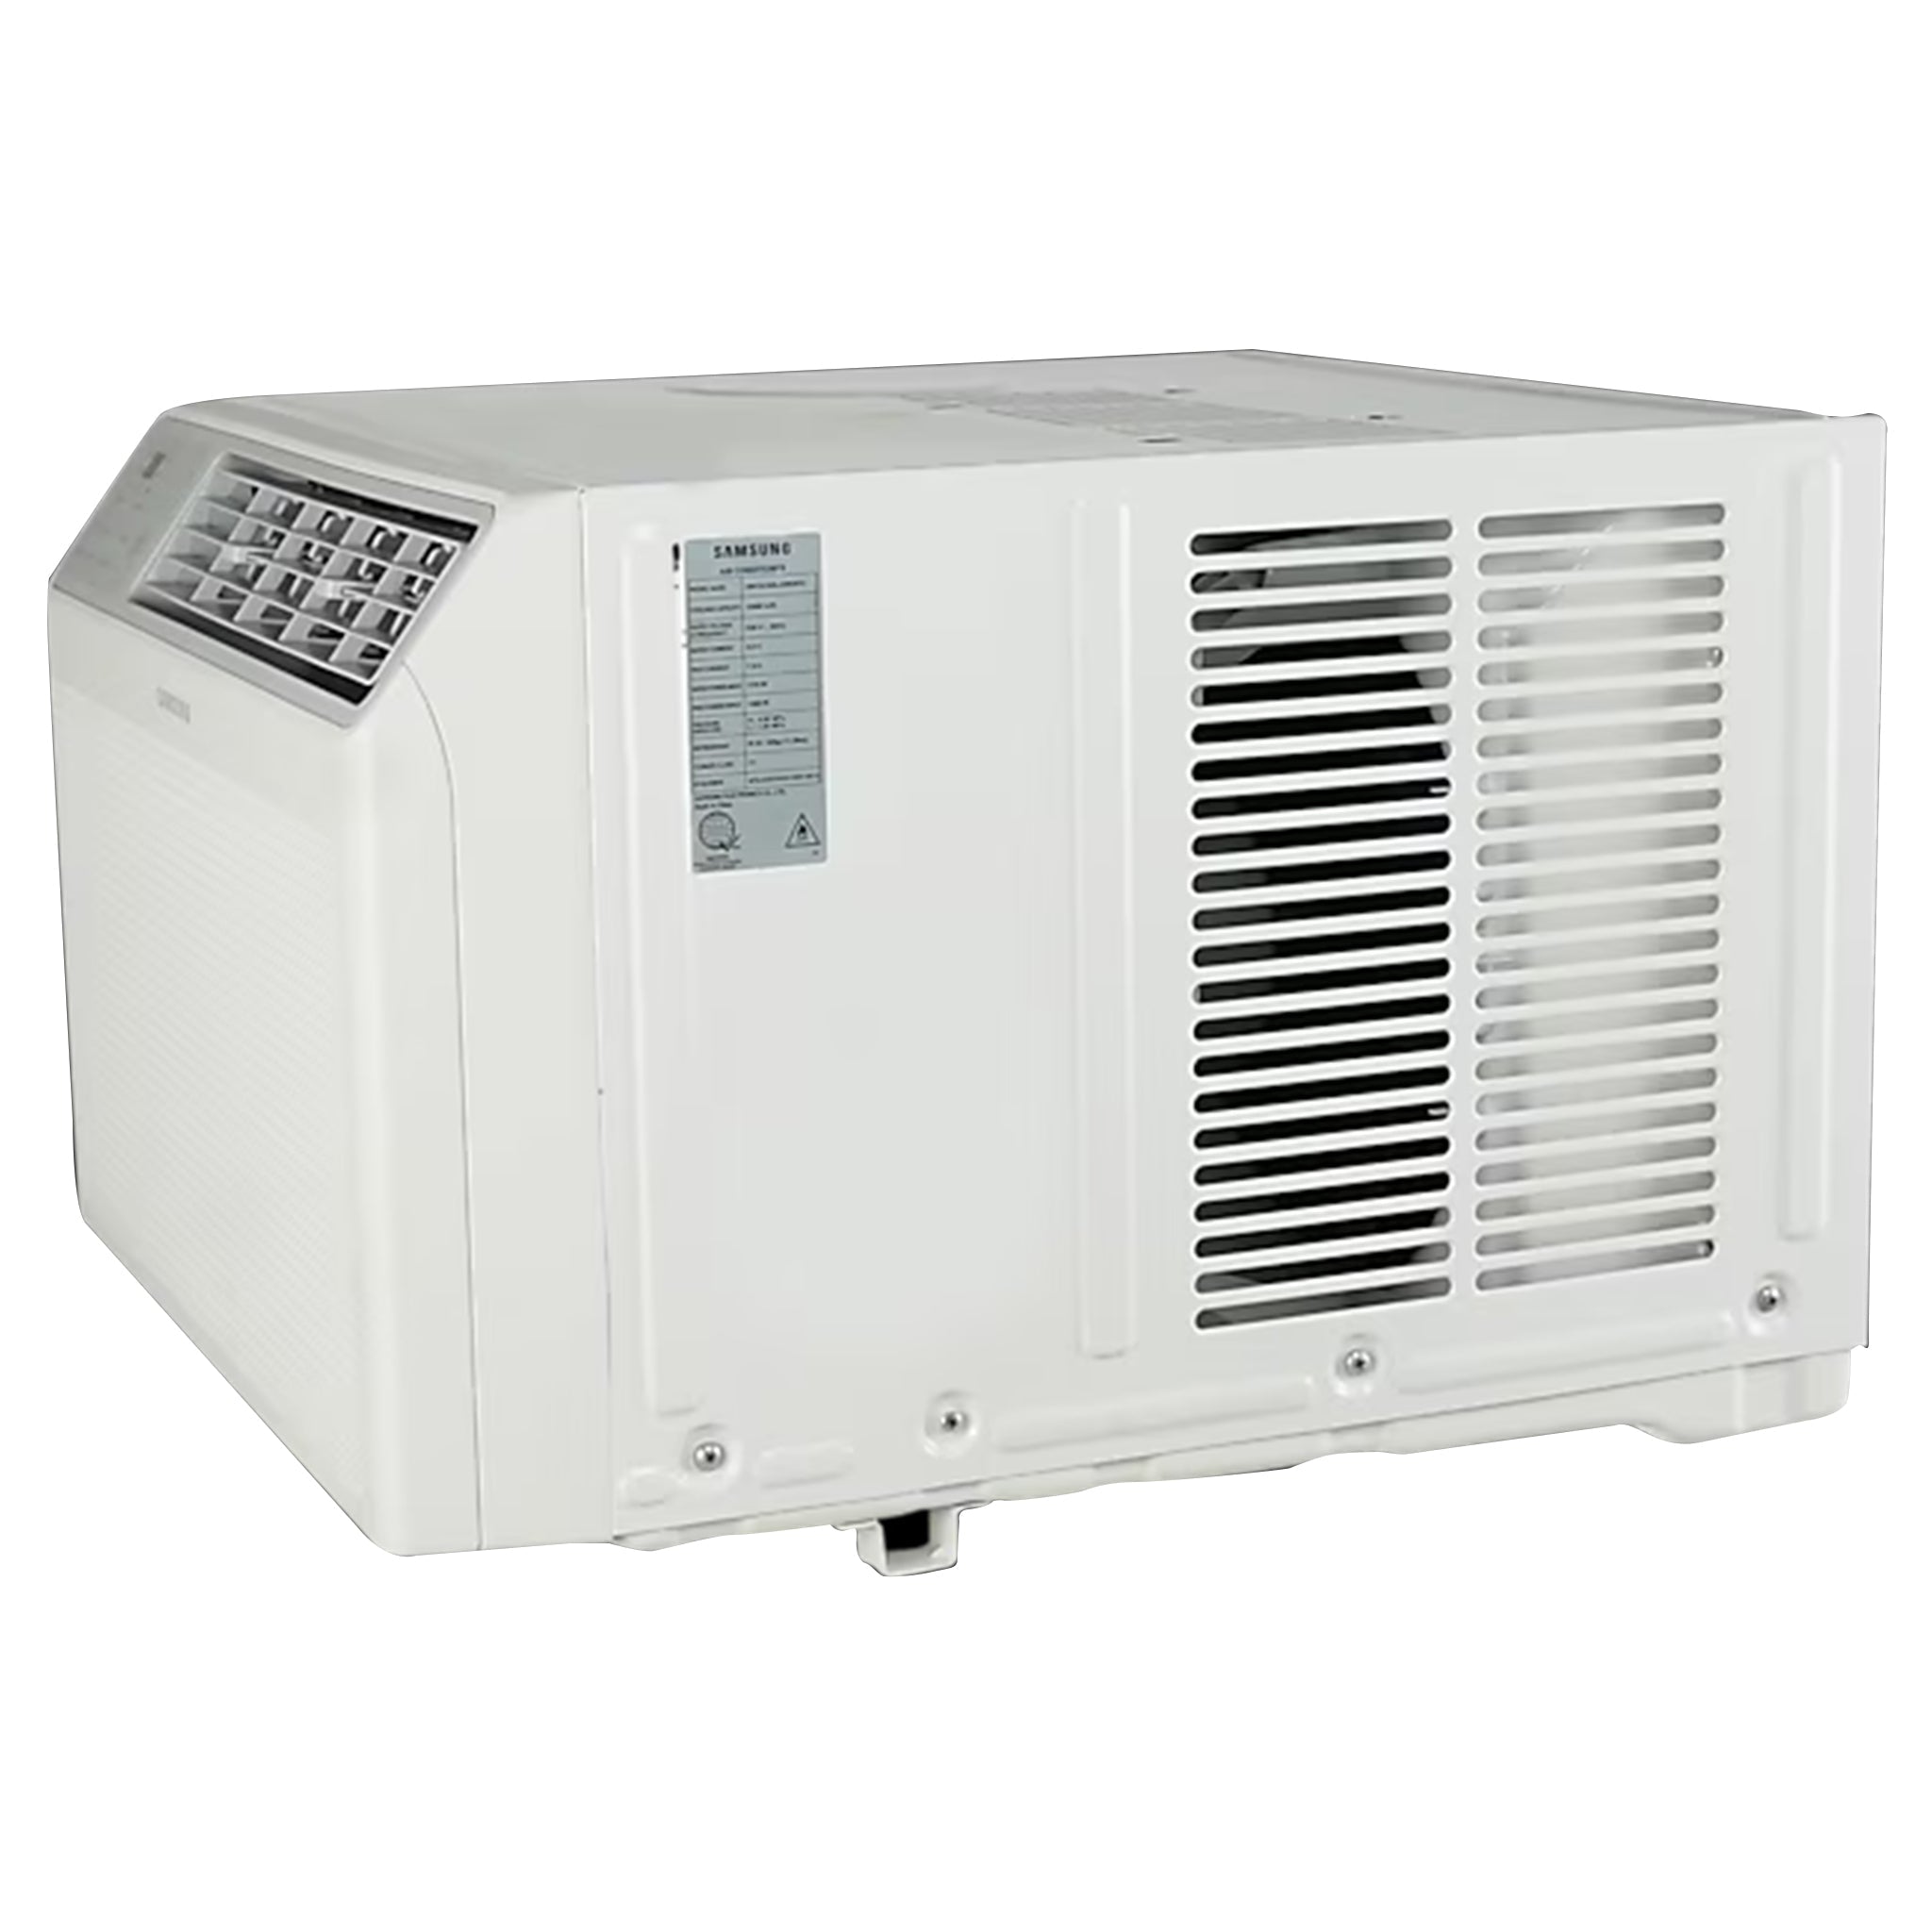 SAMSUNG AW09CGHLAWKNTC 1.0HP Window-type Compact Air Conditioner Samsung